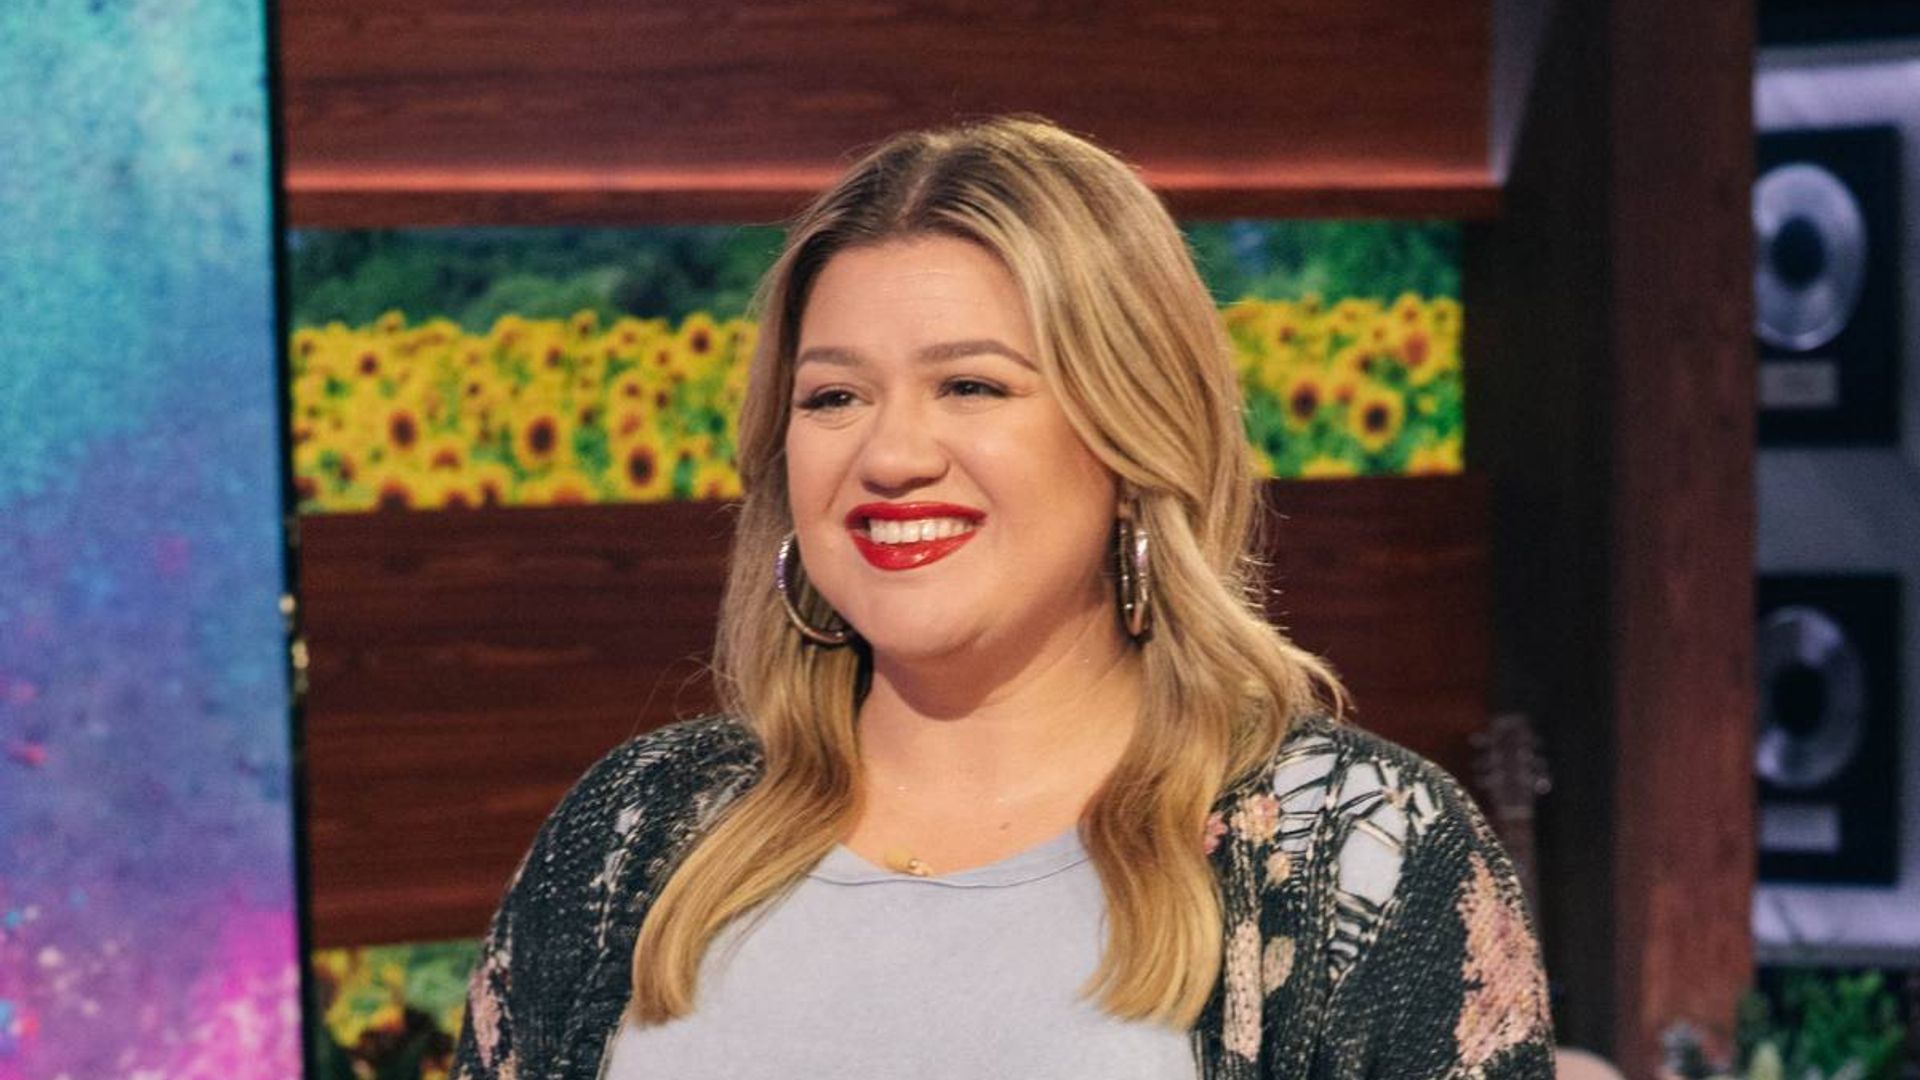 Kelly Clarkson steals the show in form-fitting silk dress during epic performance